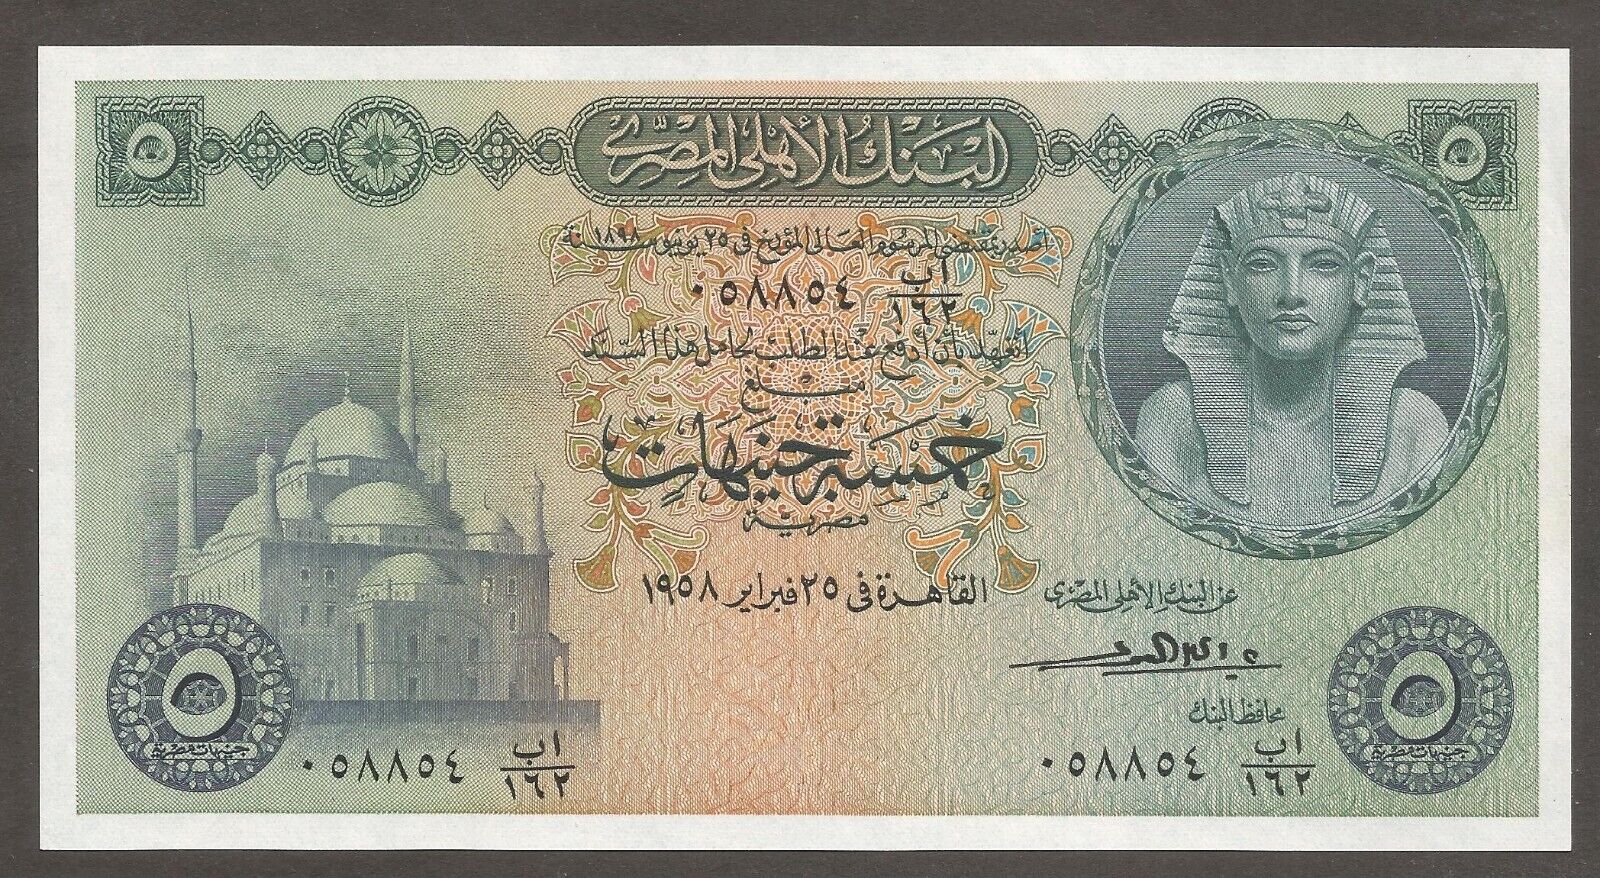 Egypt 5 Pounds 25.2.1958; Au+; P-31; L-b131c; Mosque; Fountain; Sign: El-emary